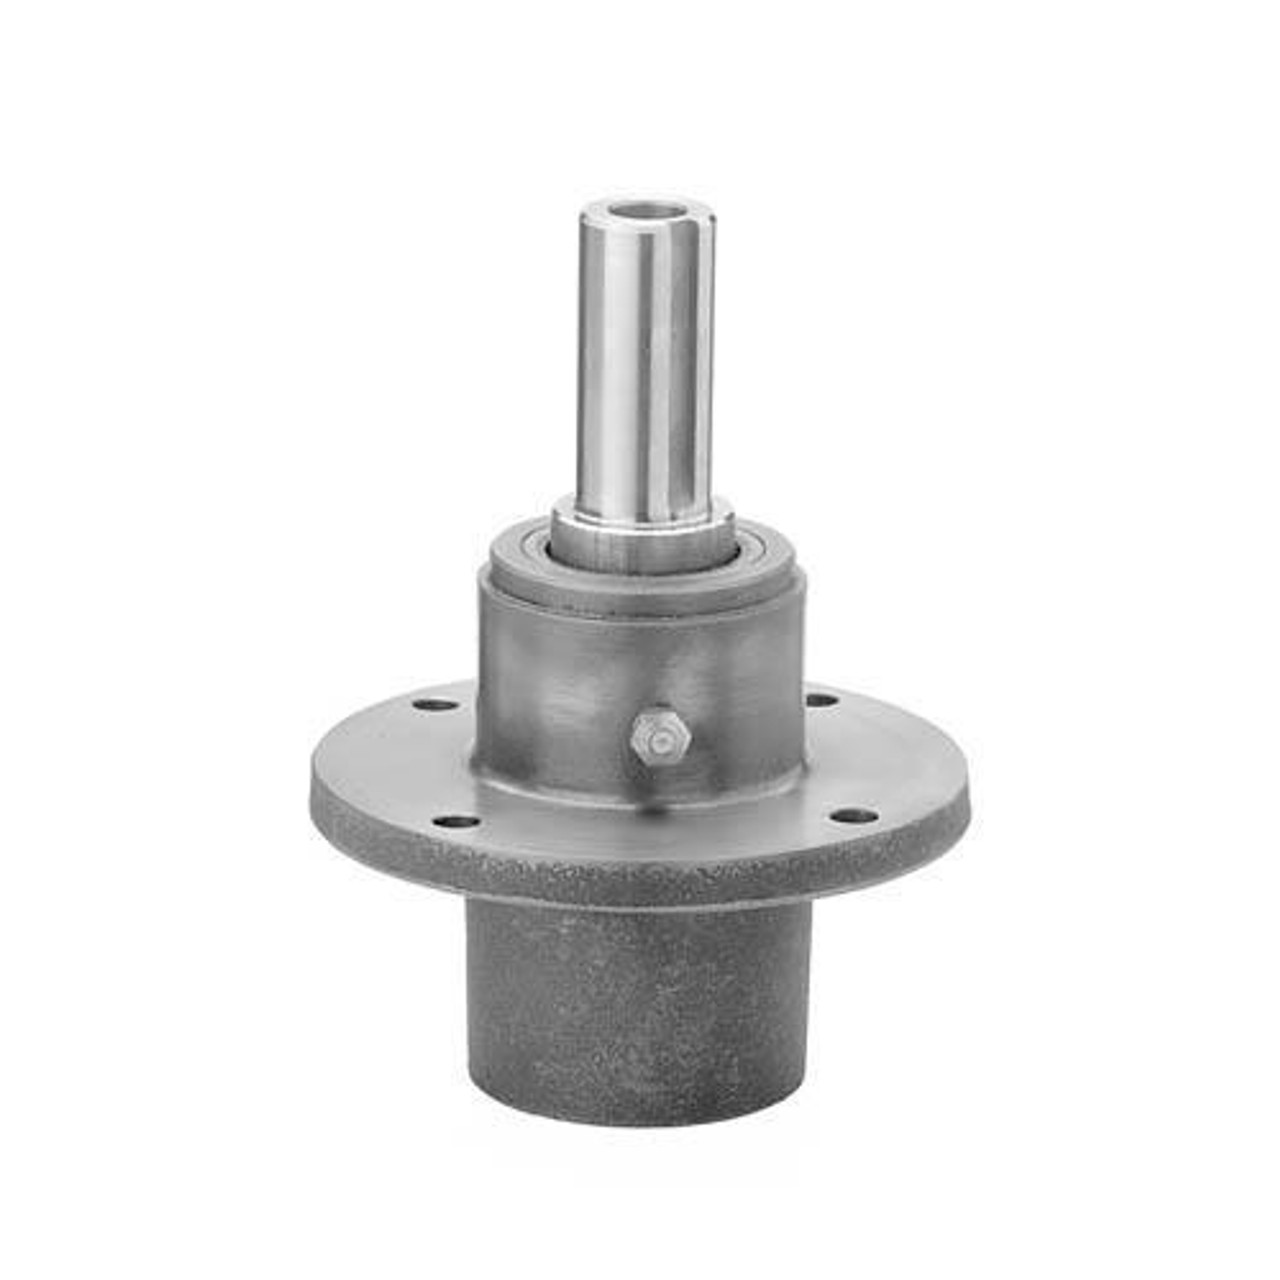 Oregon 82-325 Cast Iron Spindle Assembly for Scag. Replaces 46631